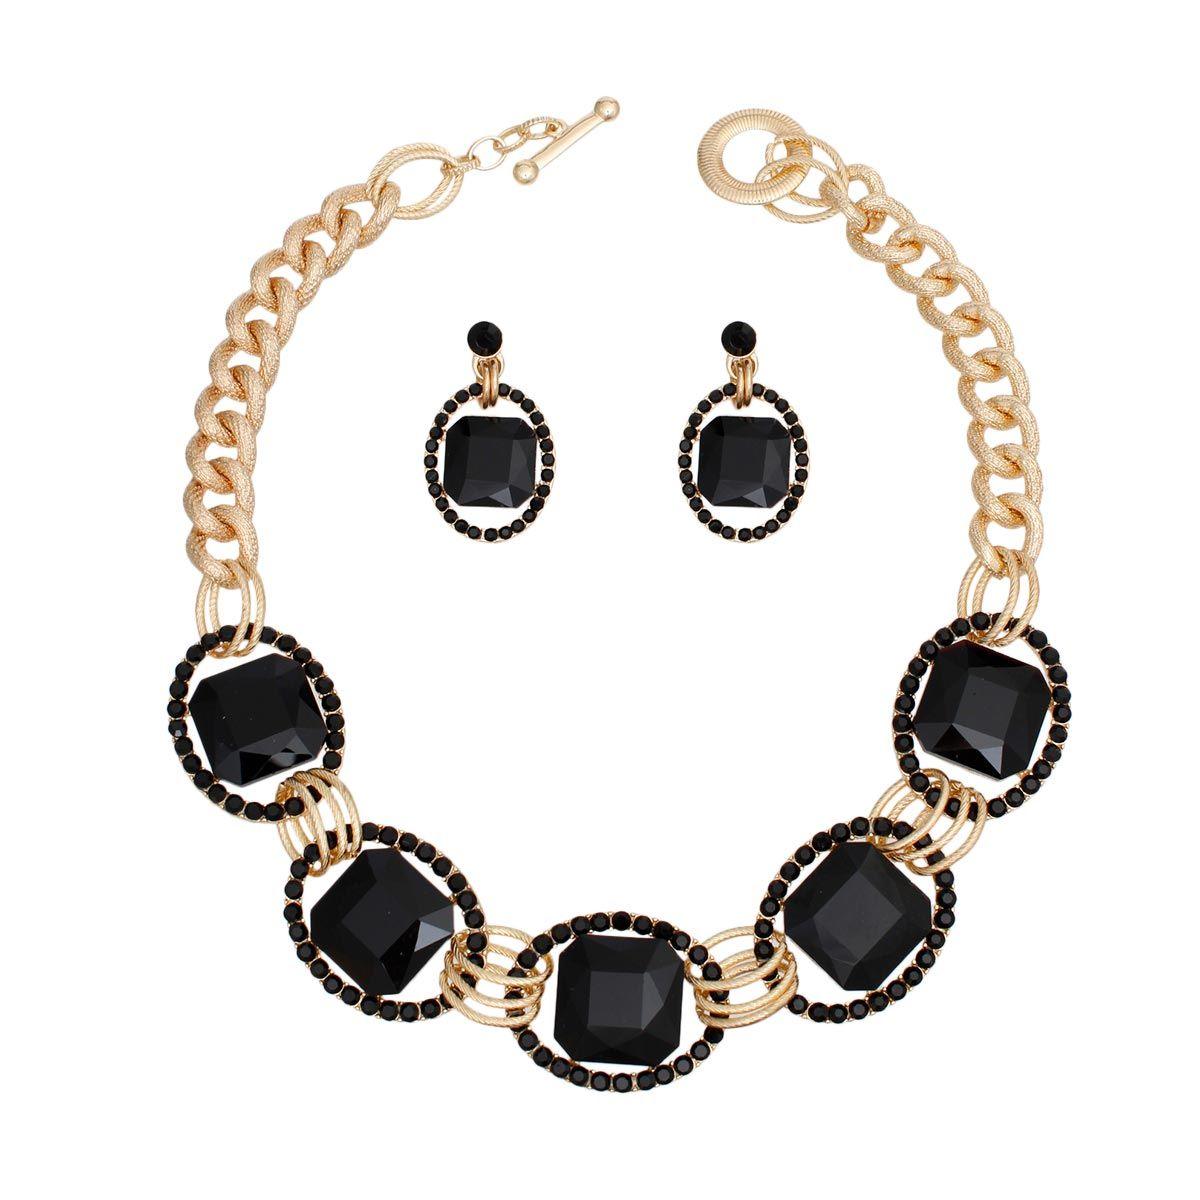 Textured Toggle Chain in Gold with Black Accents Necklace Set